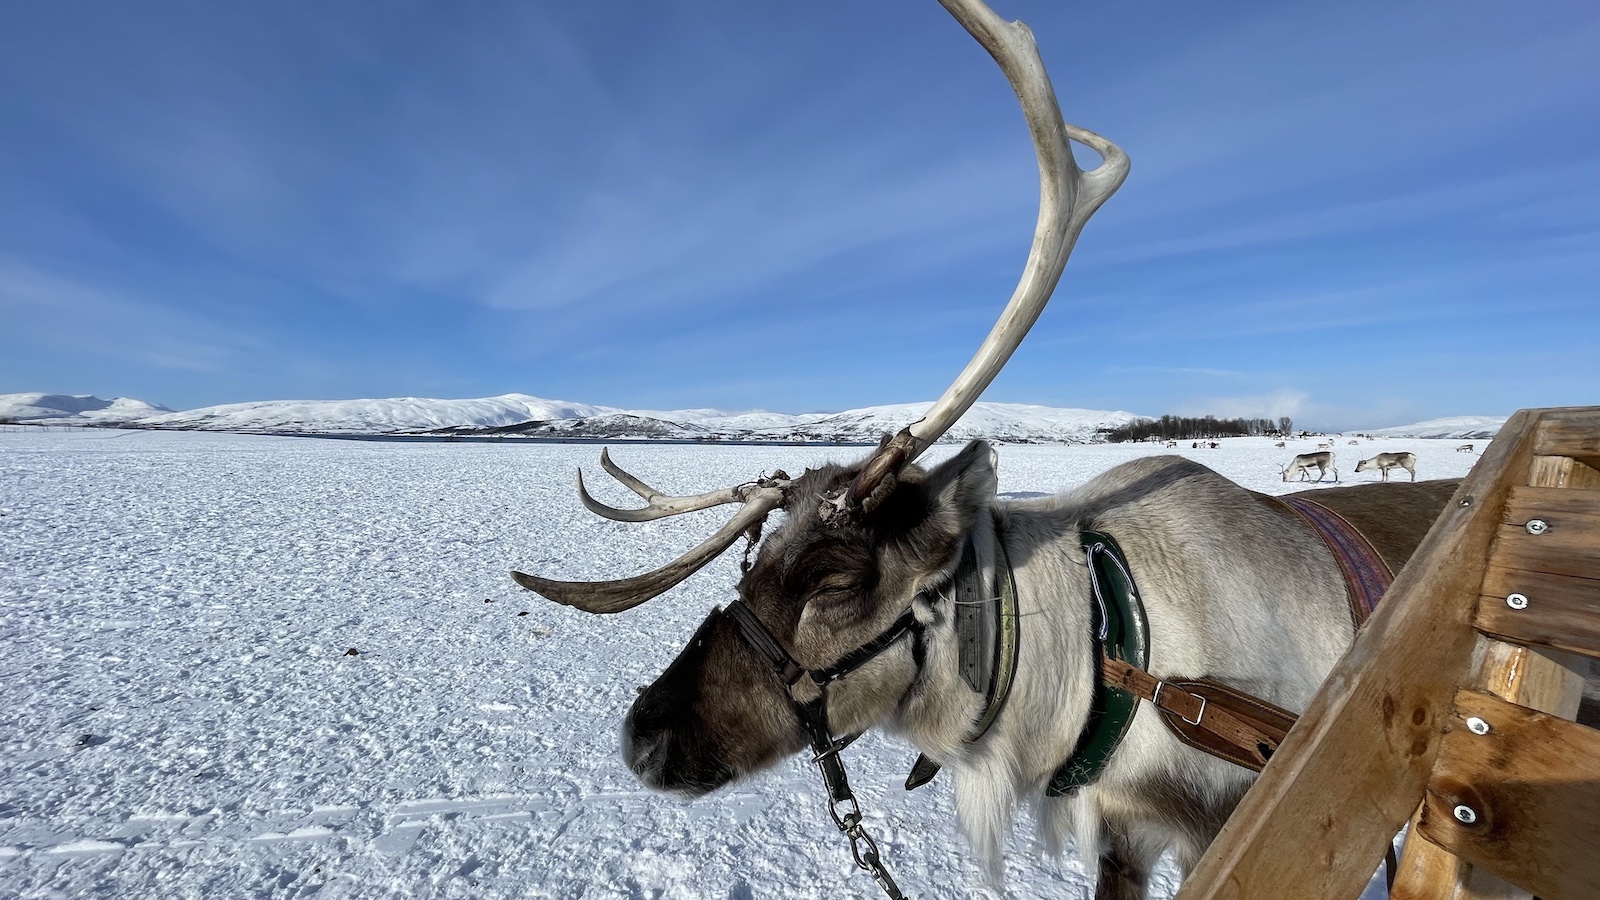 Reindeer Getting Ready to Push Sleigh